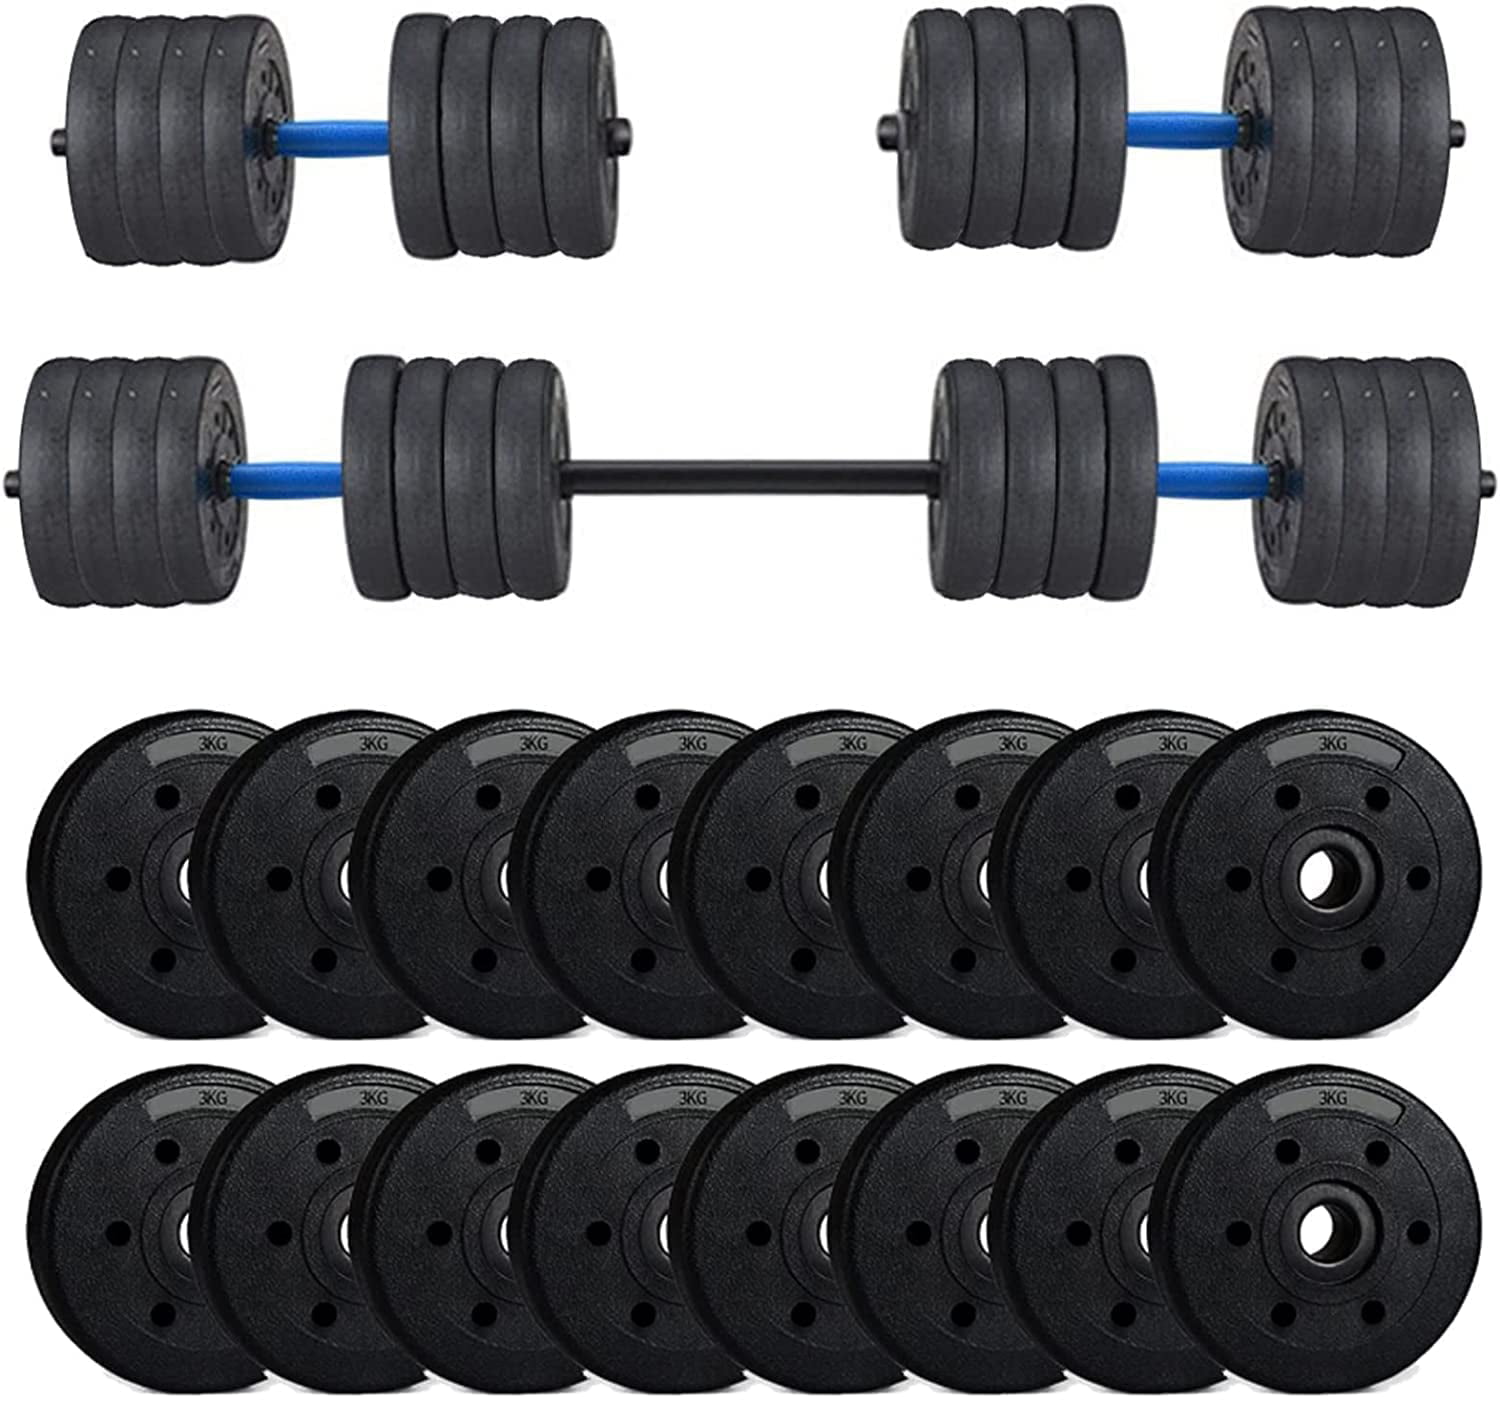 Adjustable Olympics Dumbbell Set 44-88lb Weight Barbell Plates Body Home Workout 